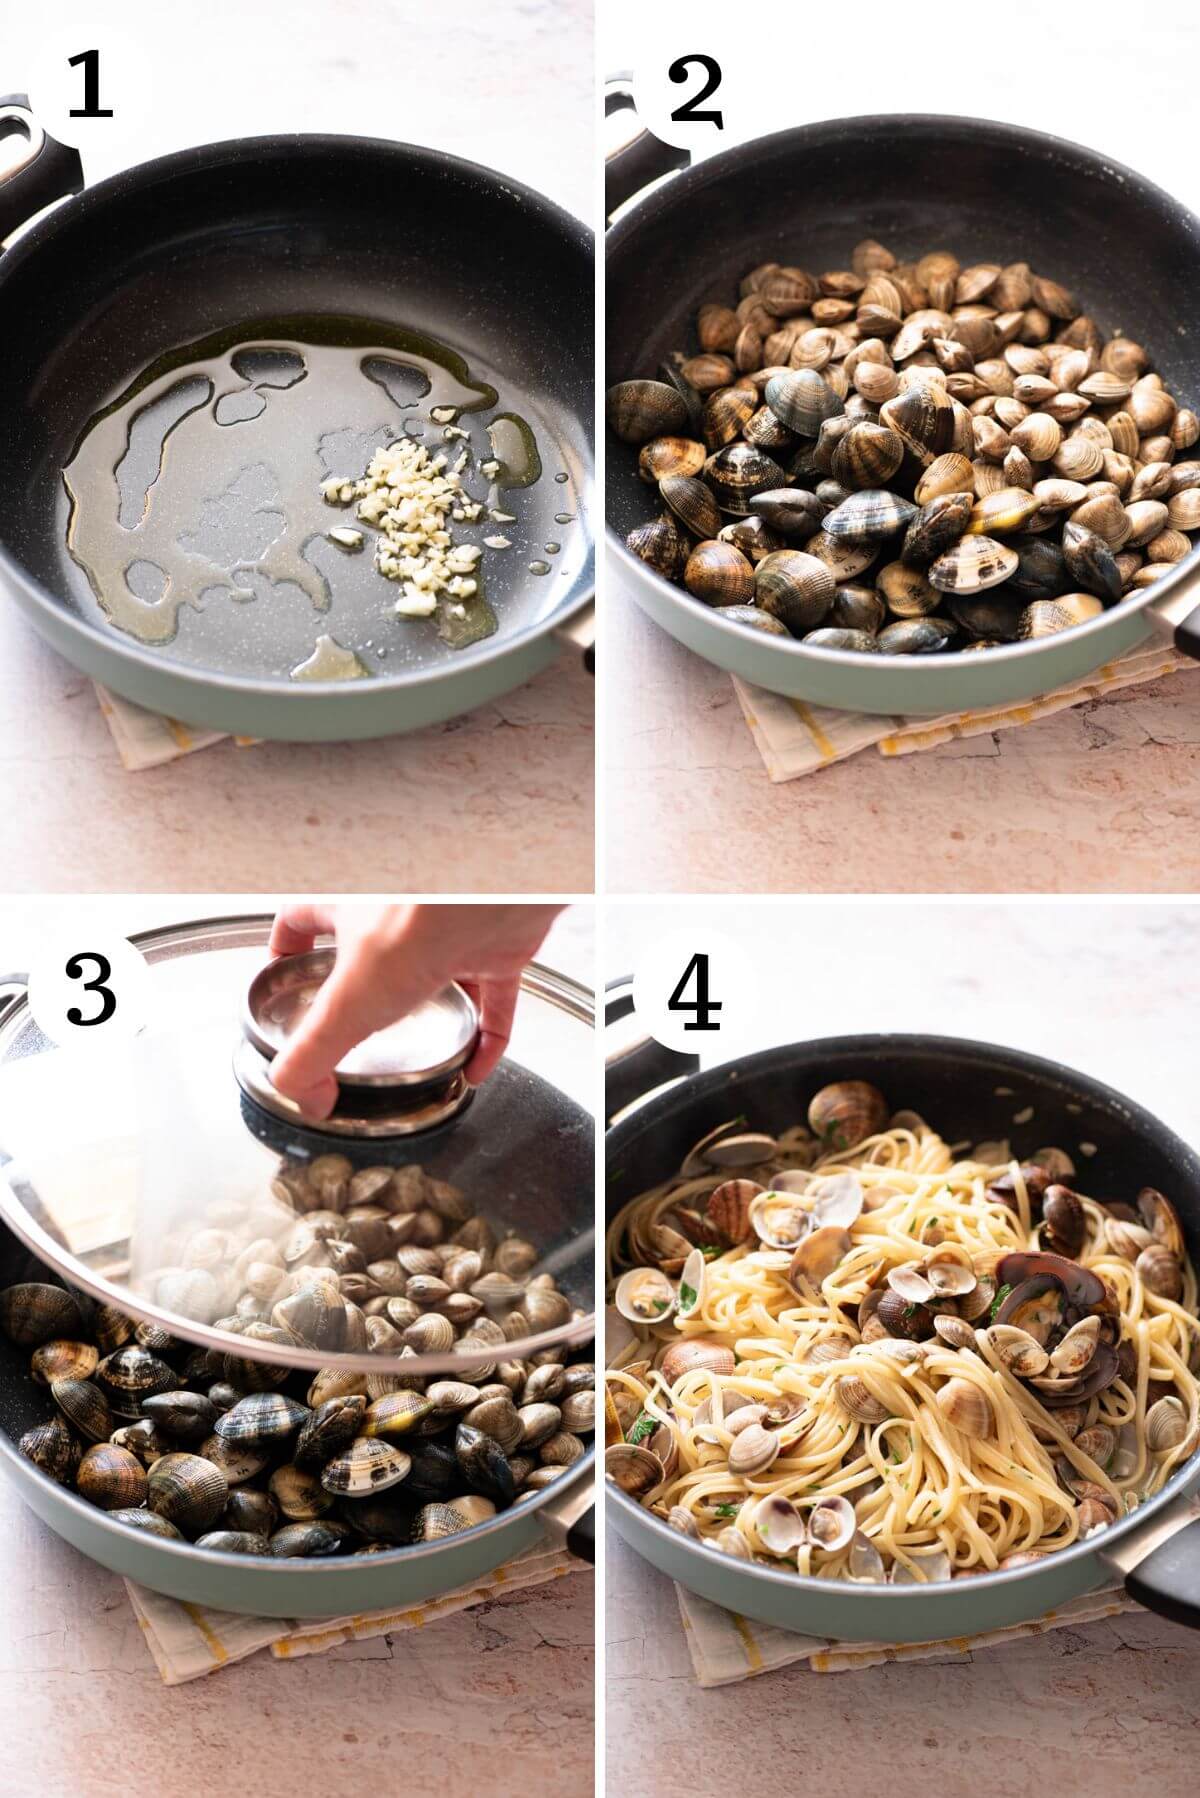 Four photos in a collage showing how to make Linguine pasta with clams.